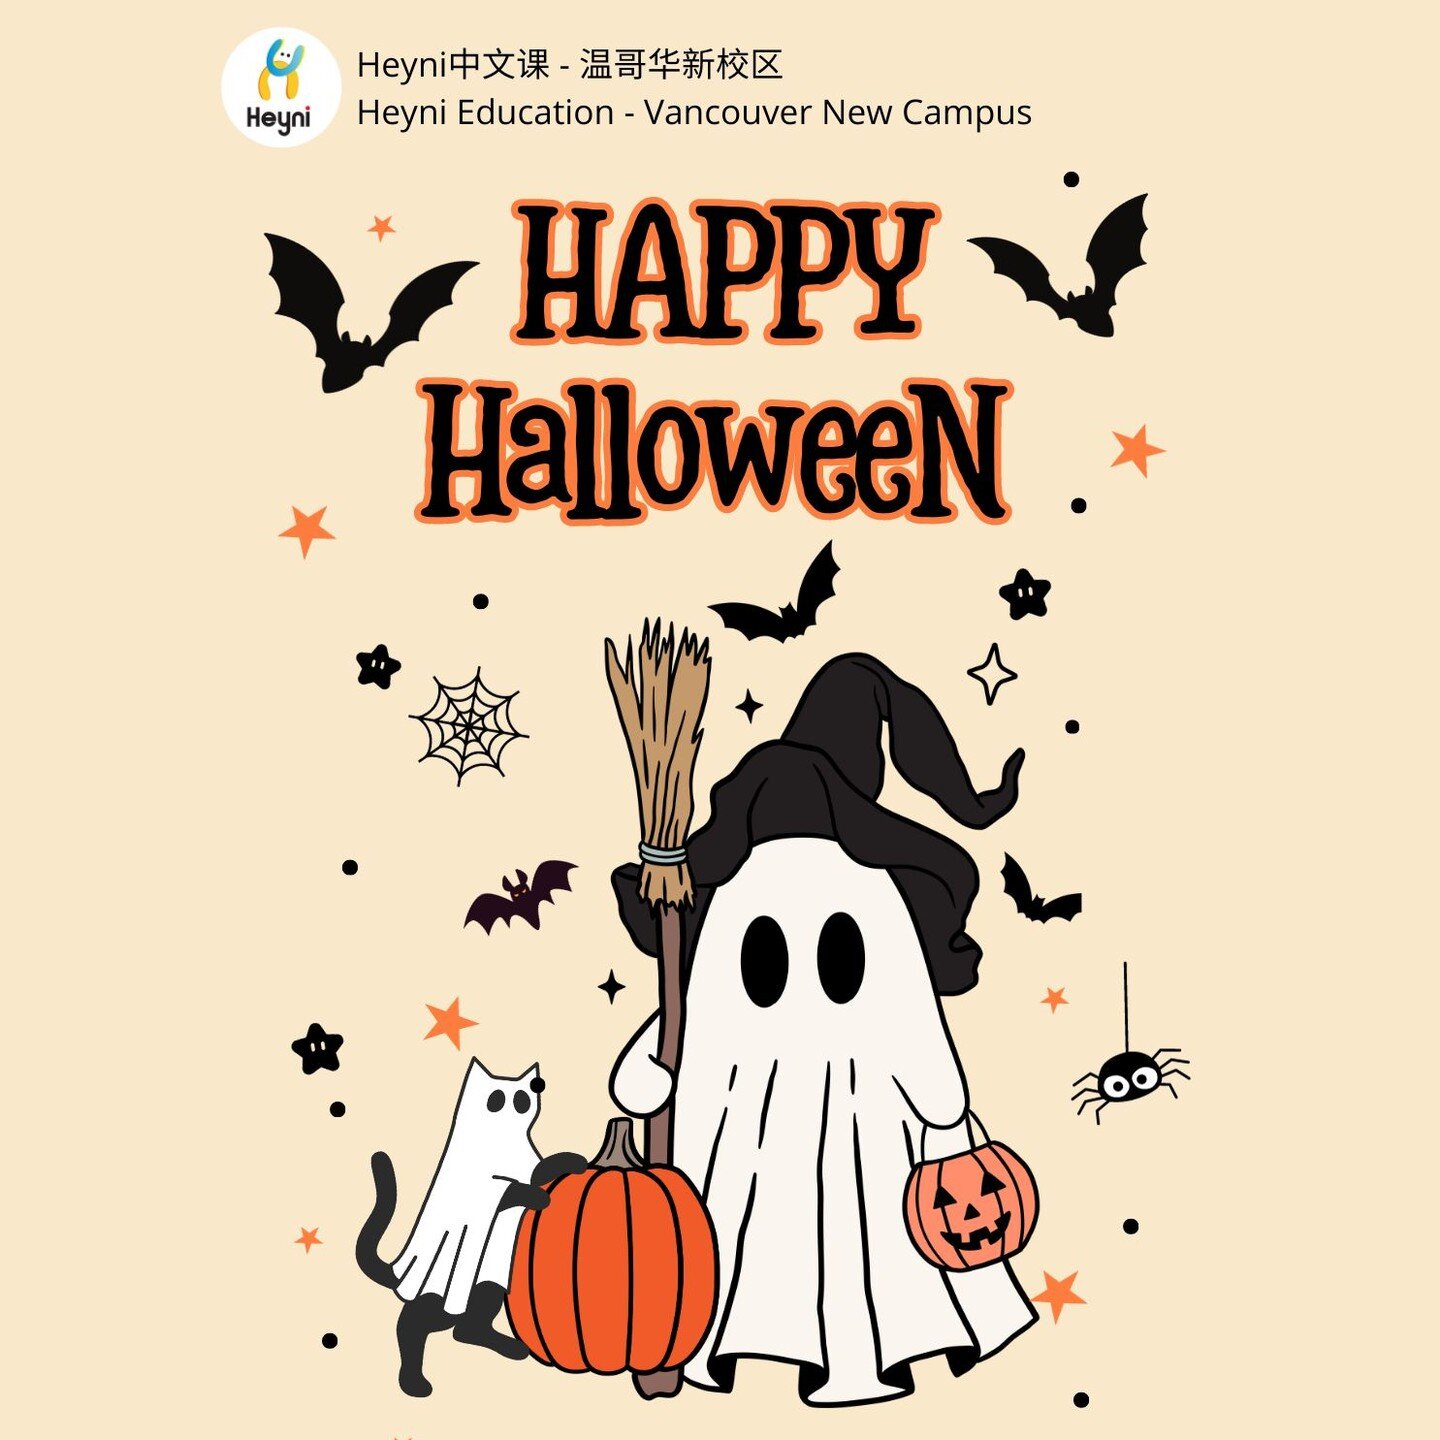 What's the plan for family fun today?
☀ Join 🎃 Vancouver's Dunbar Village Halloween 🎃 on this sunny afternoon!

🕒 It's from 3 PM to 5 PM.
🅿 Free street parking on the side streets, or at the Dunbar Community Centre.
🏡 Heyni Education Vancouver N